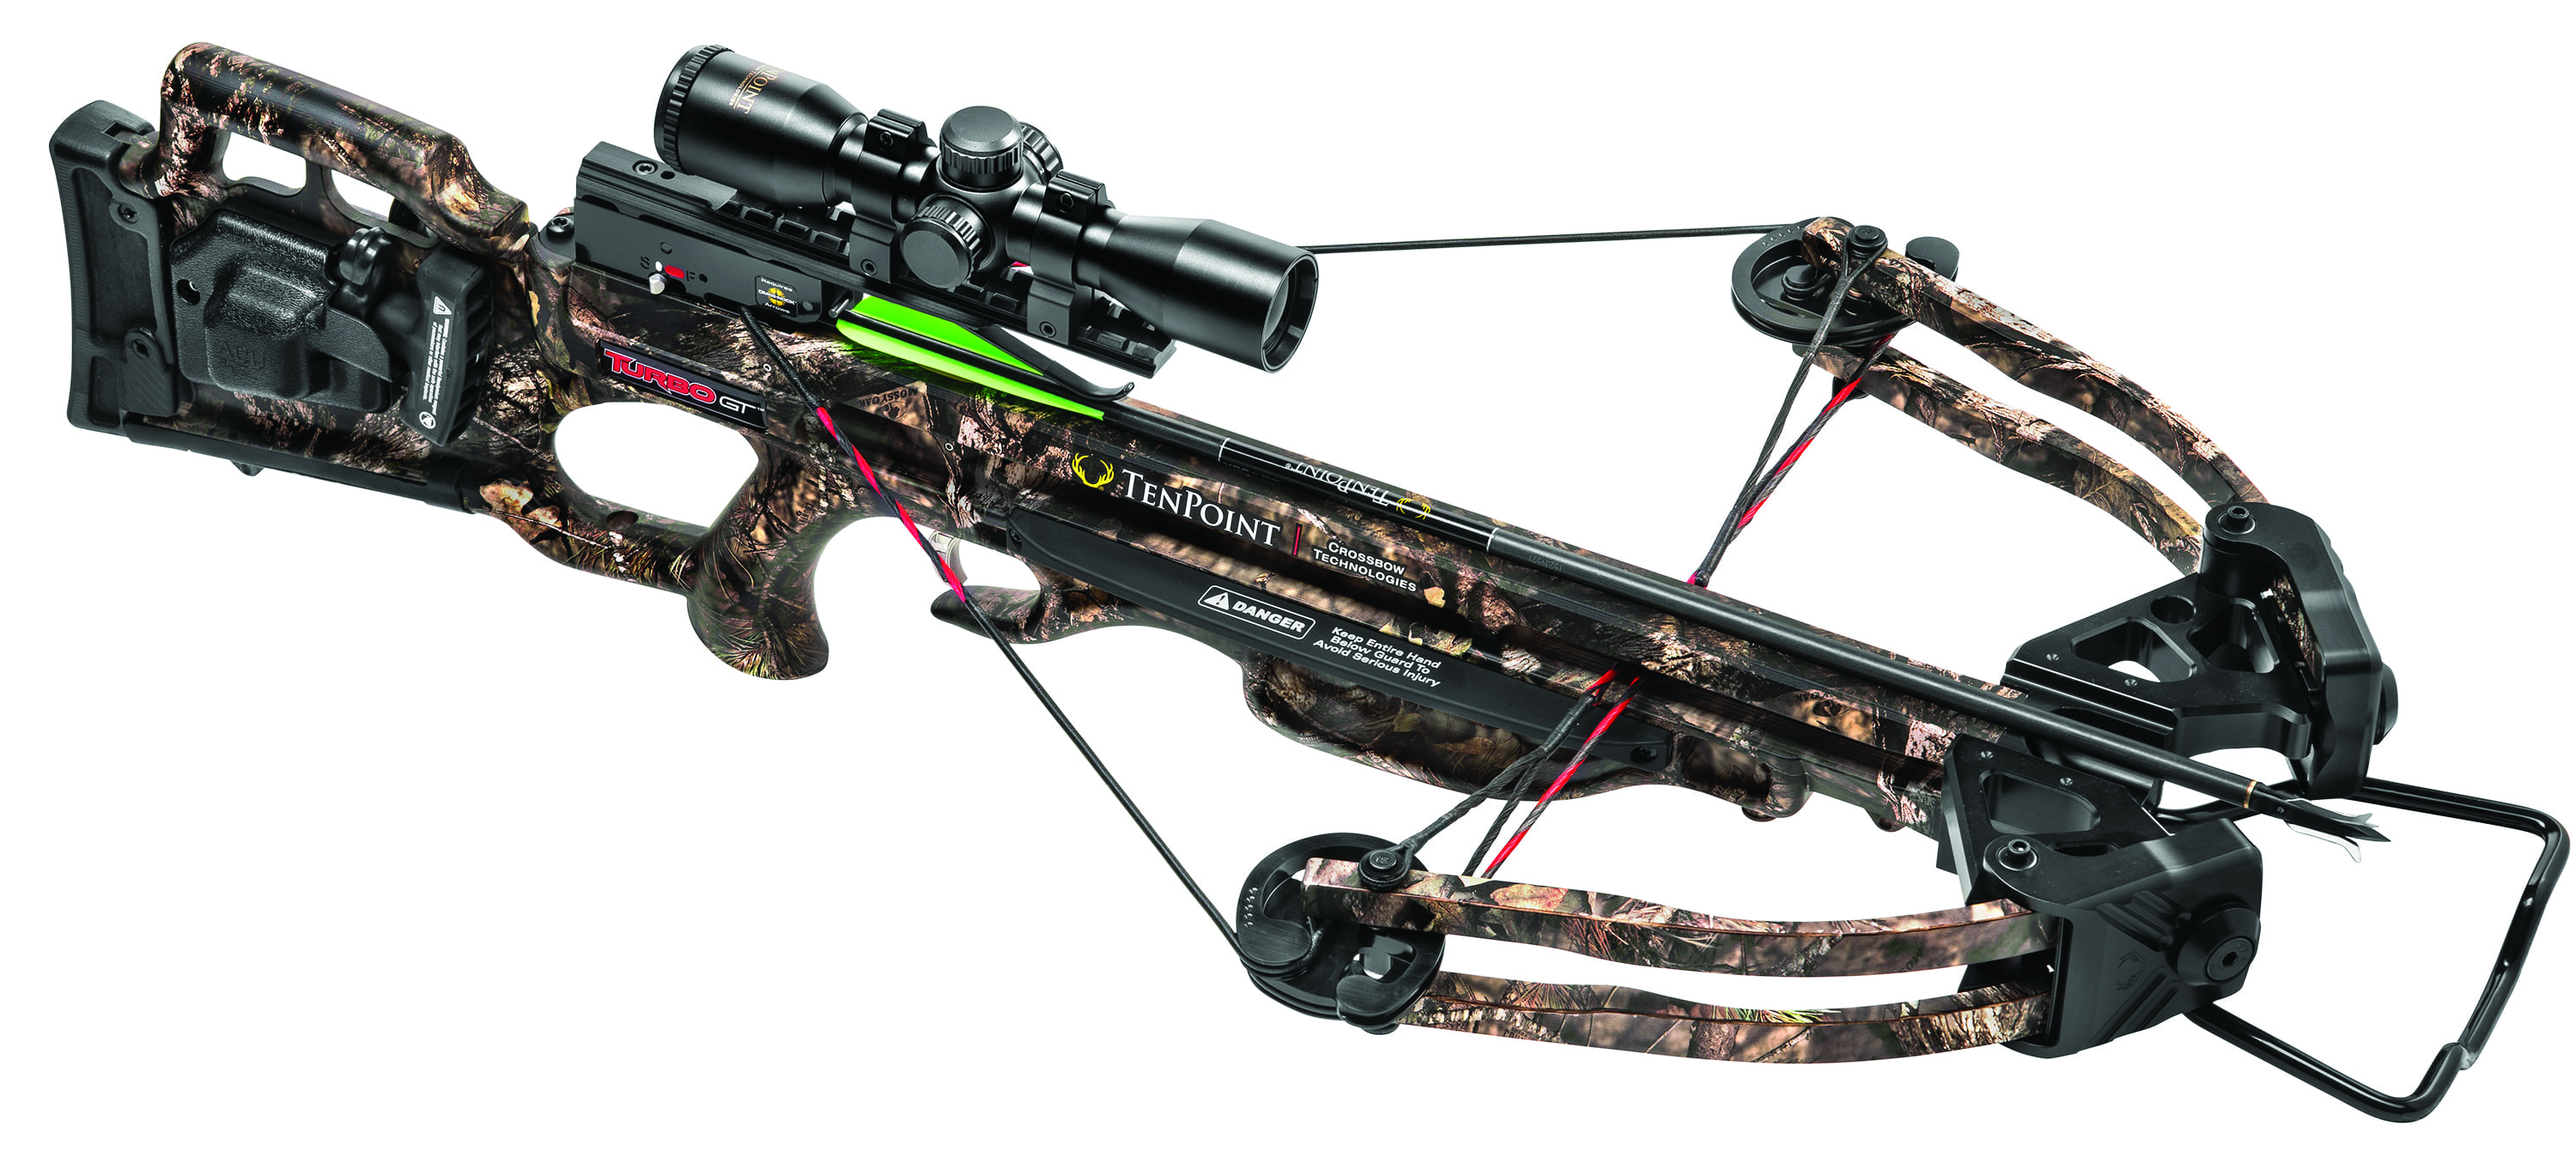 Lightweight, compact Turbo GT Crossbow from TenPoint - Texas